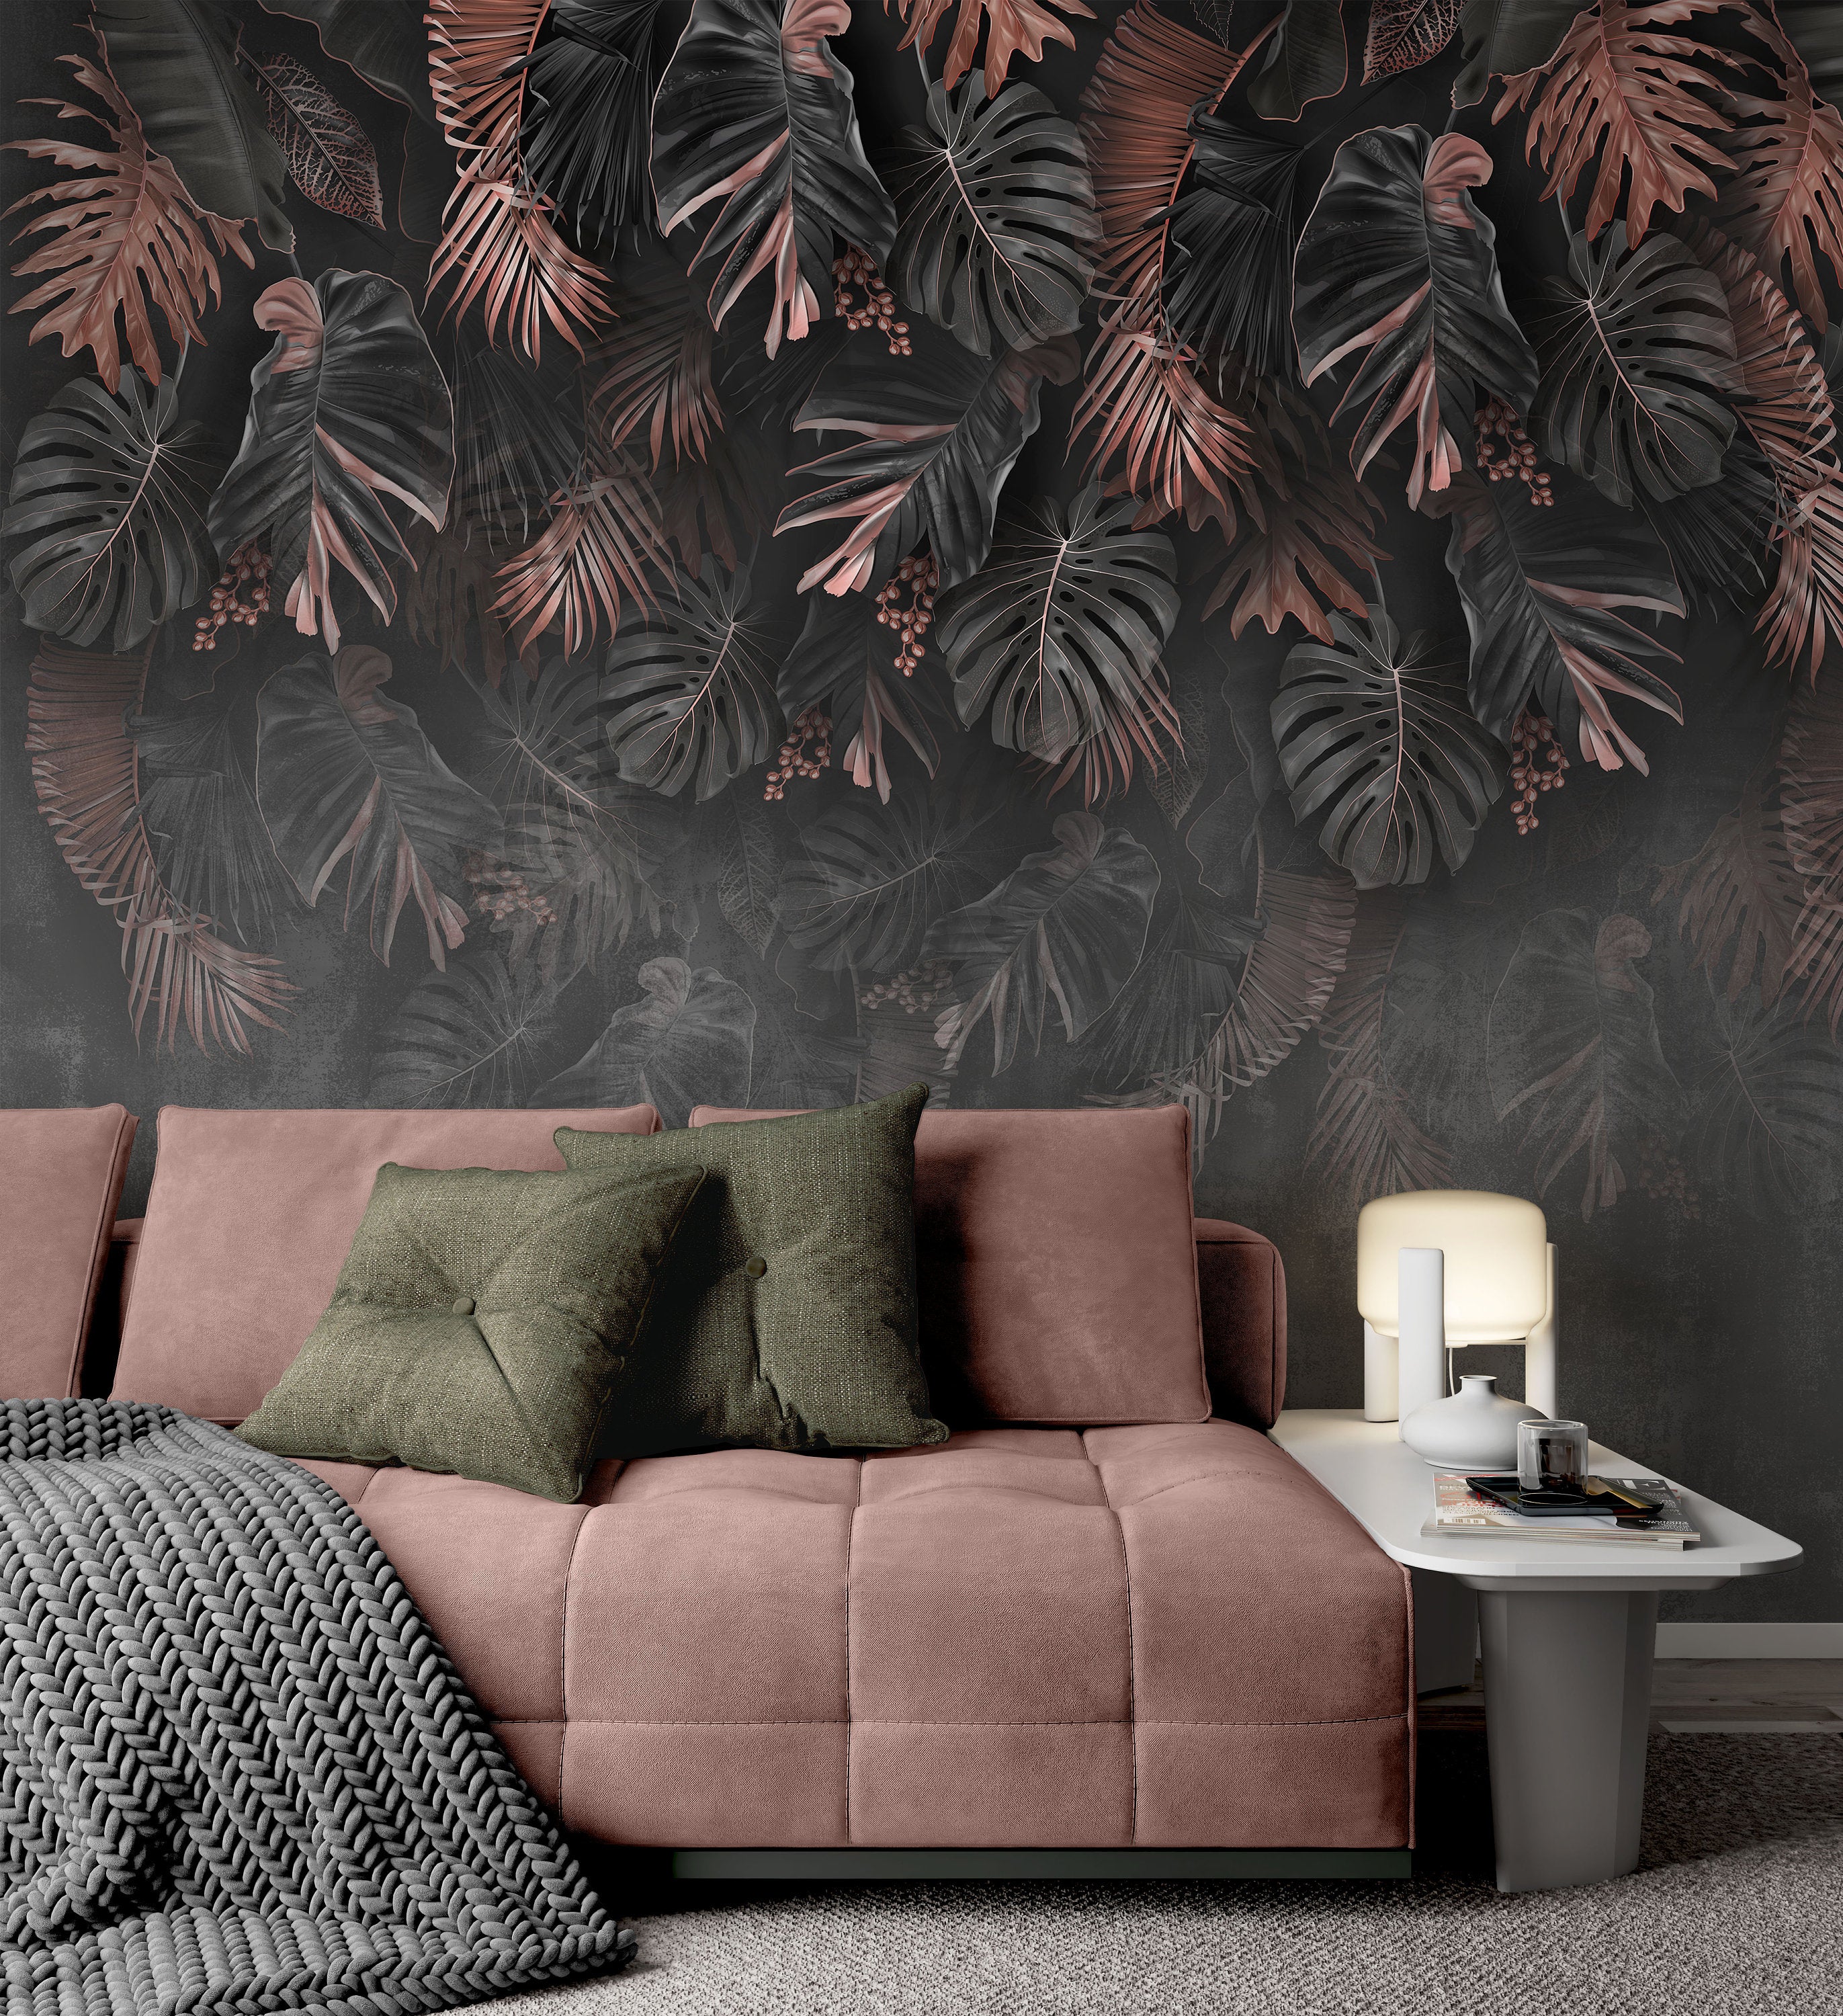 Big Leaves on The Gray Background Wallpaper Mural Home Wall Art